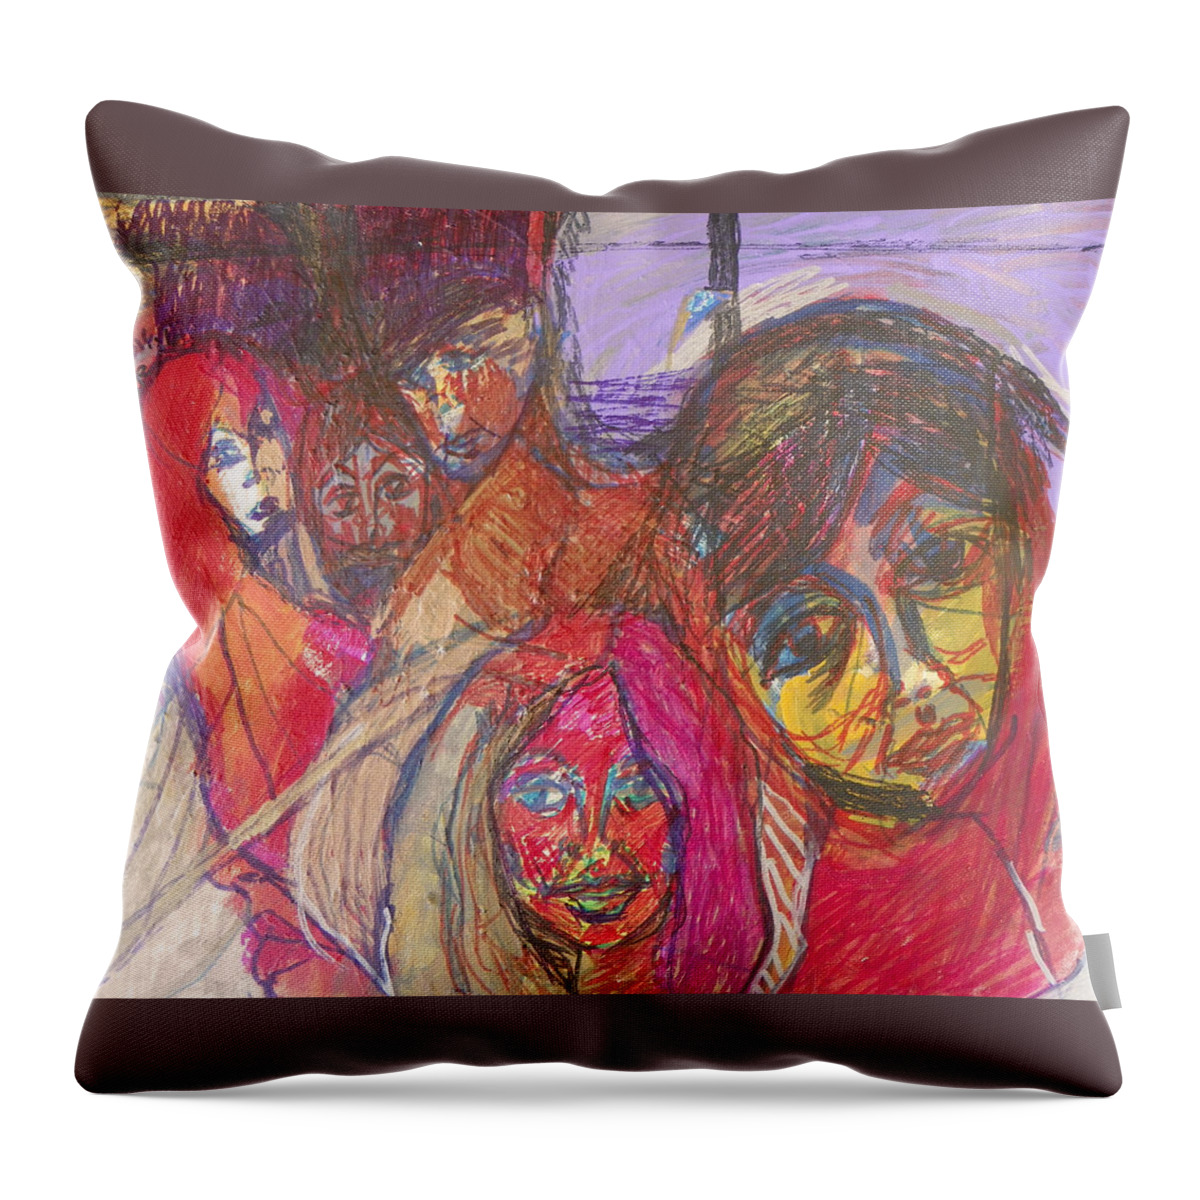 Expressive Throw Pillow featuring the painting The Jones Family by Judith Redman